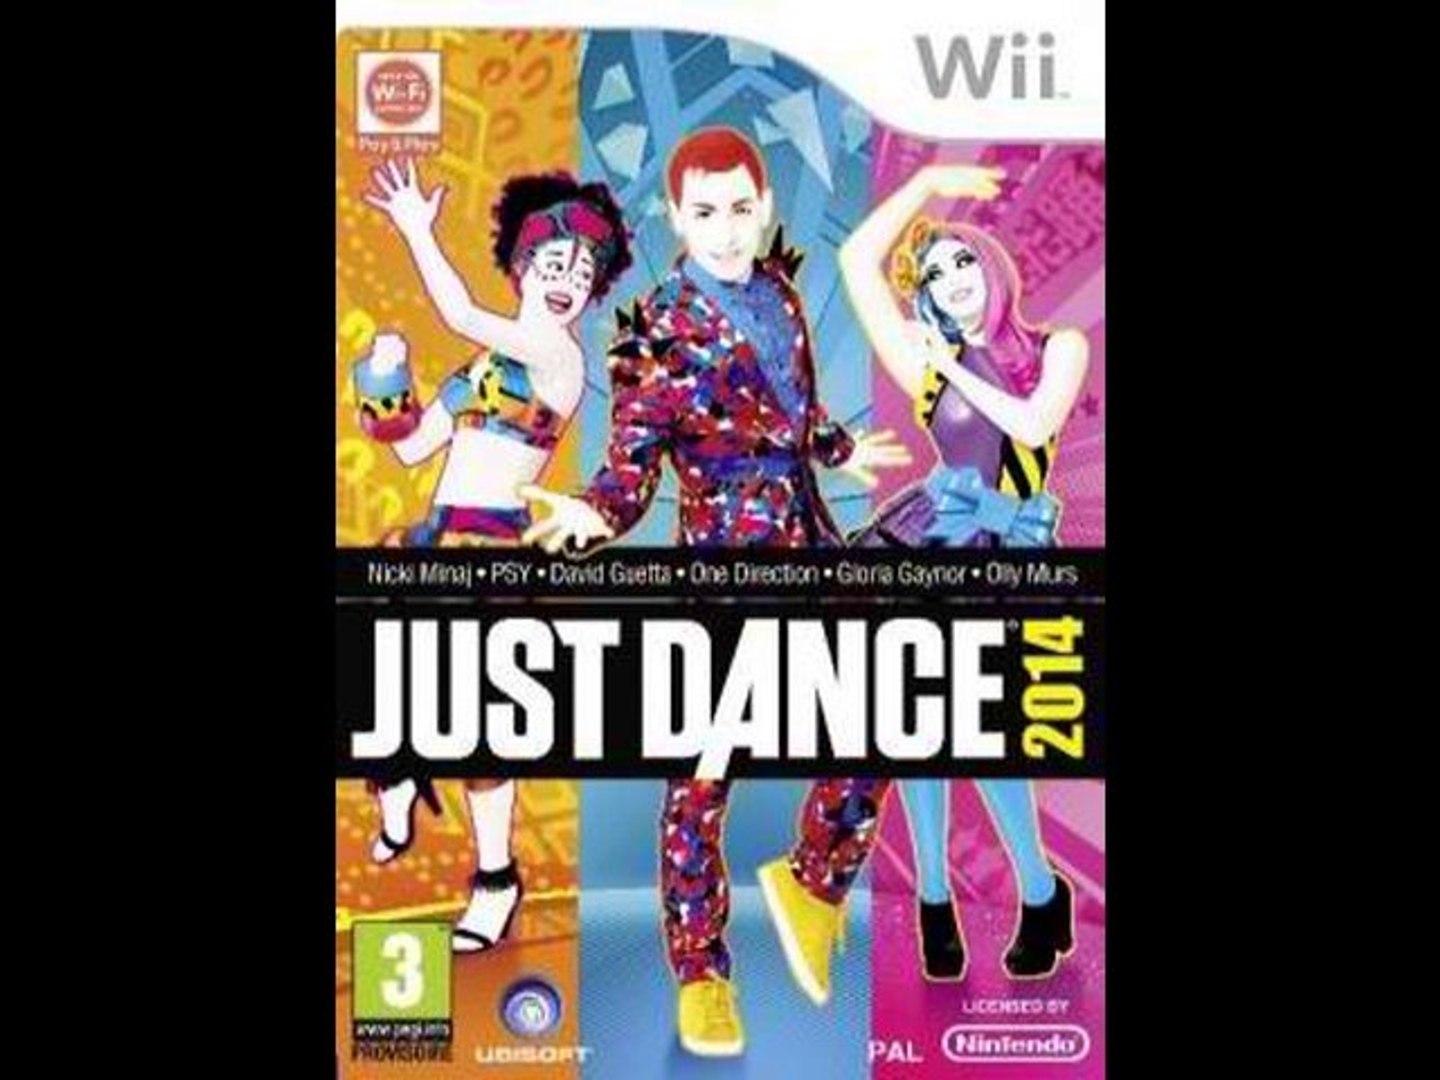 Just Dance 2014 Wii Game ISO File Download - video Dailymotion